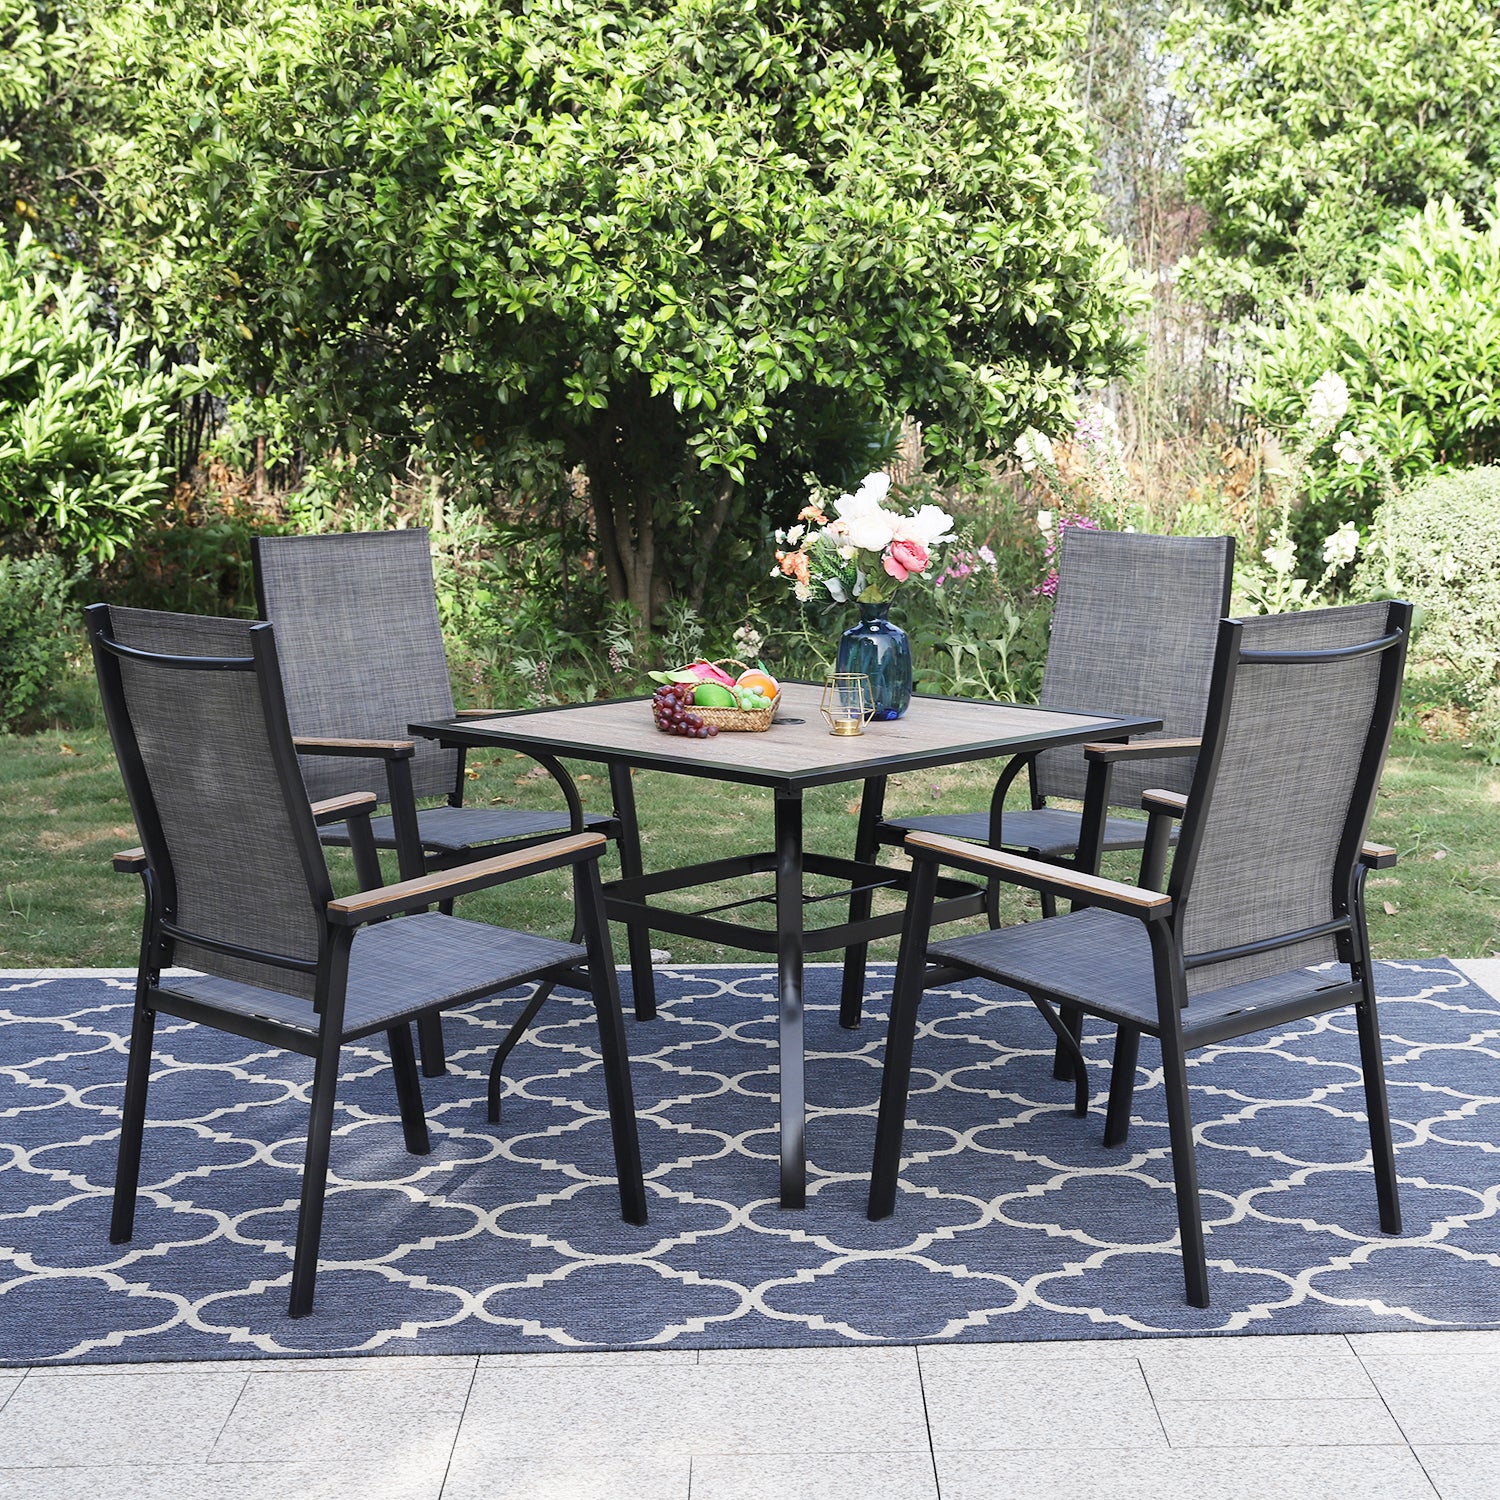 PHI VILLA Wood-look Square Table & 4 Textilene Fixed Chairs 5-Piece Outdoor Dining Set